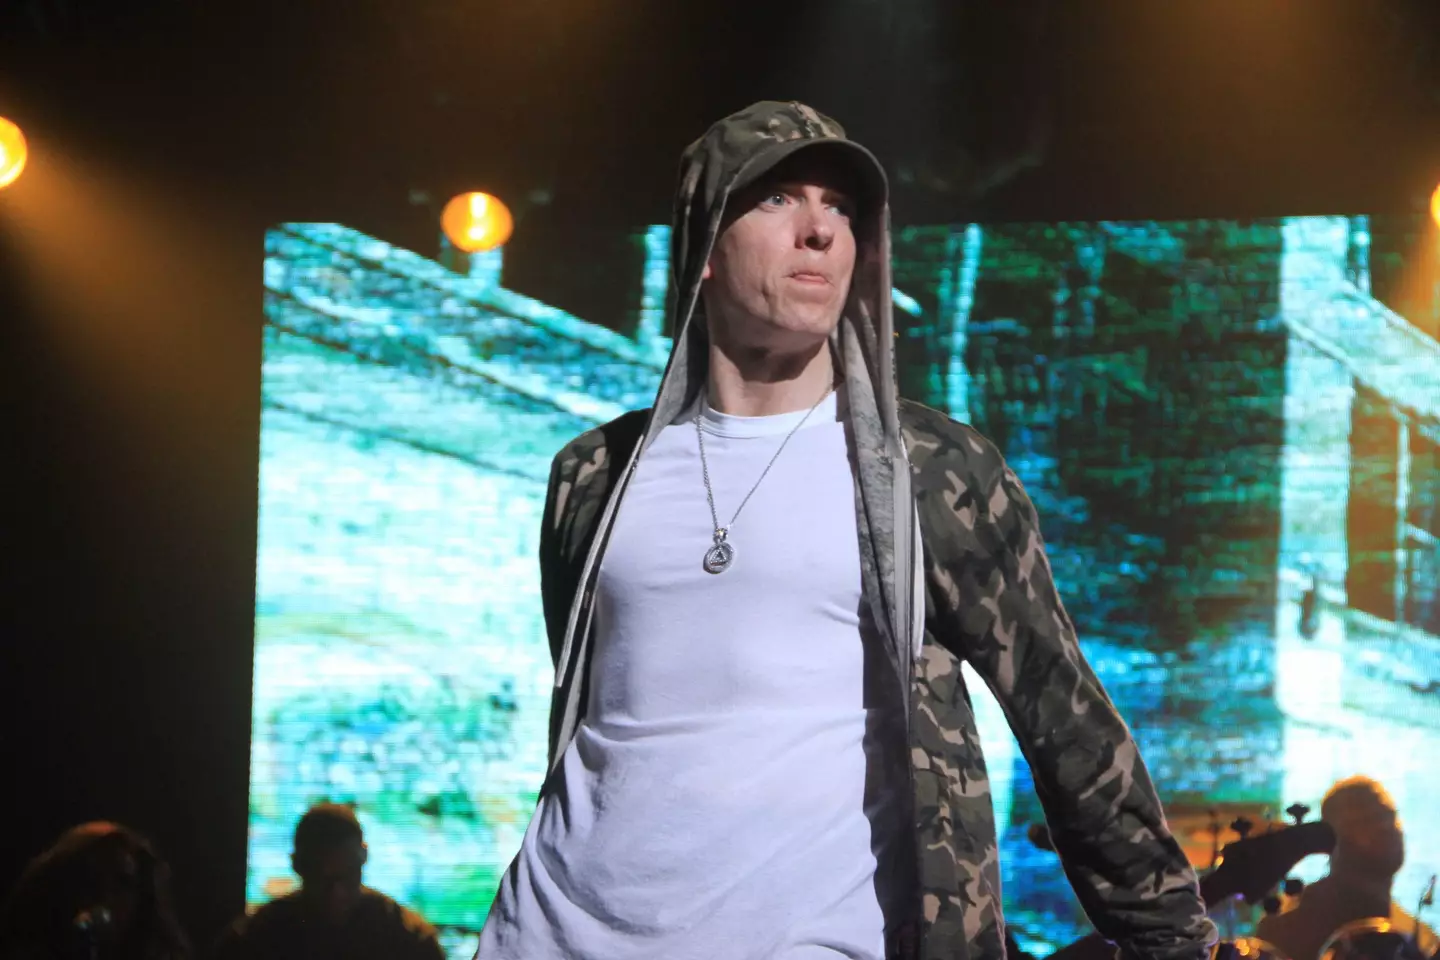 Eminem is not actually featured on the song.